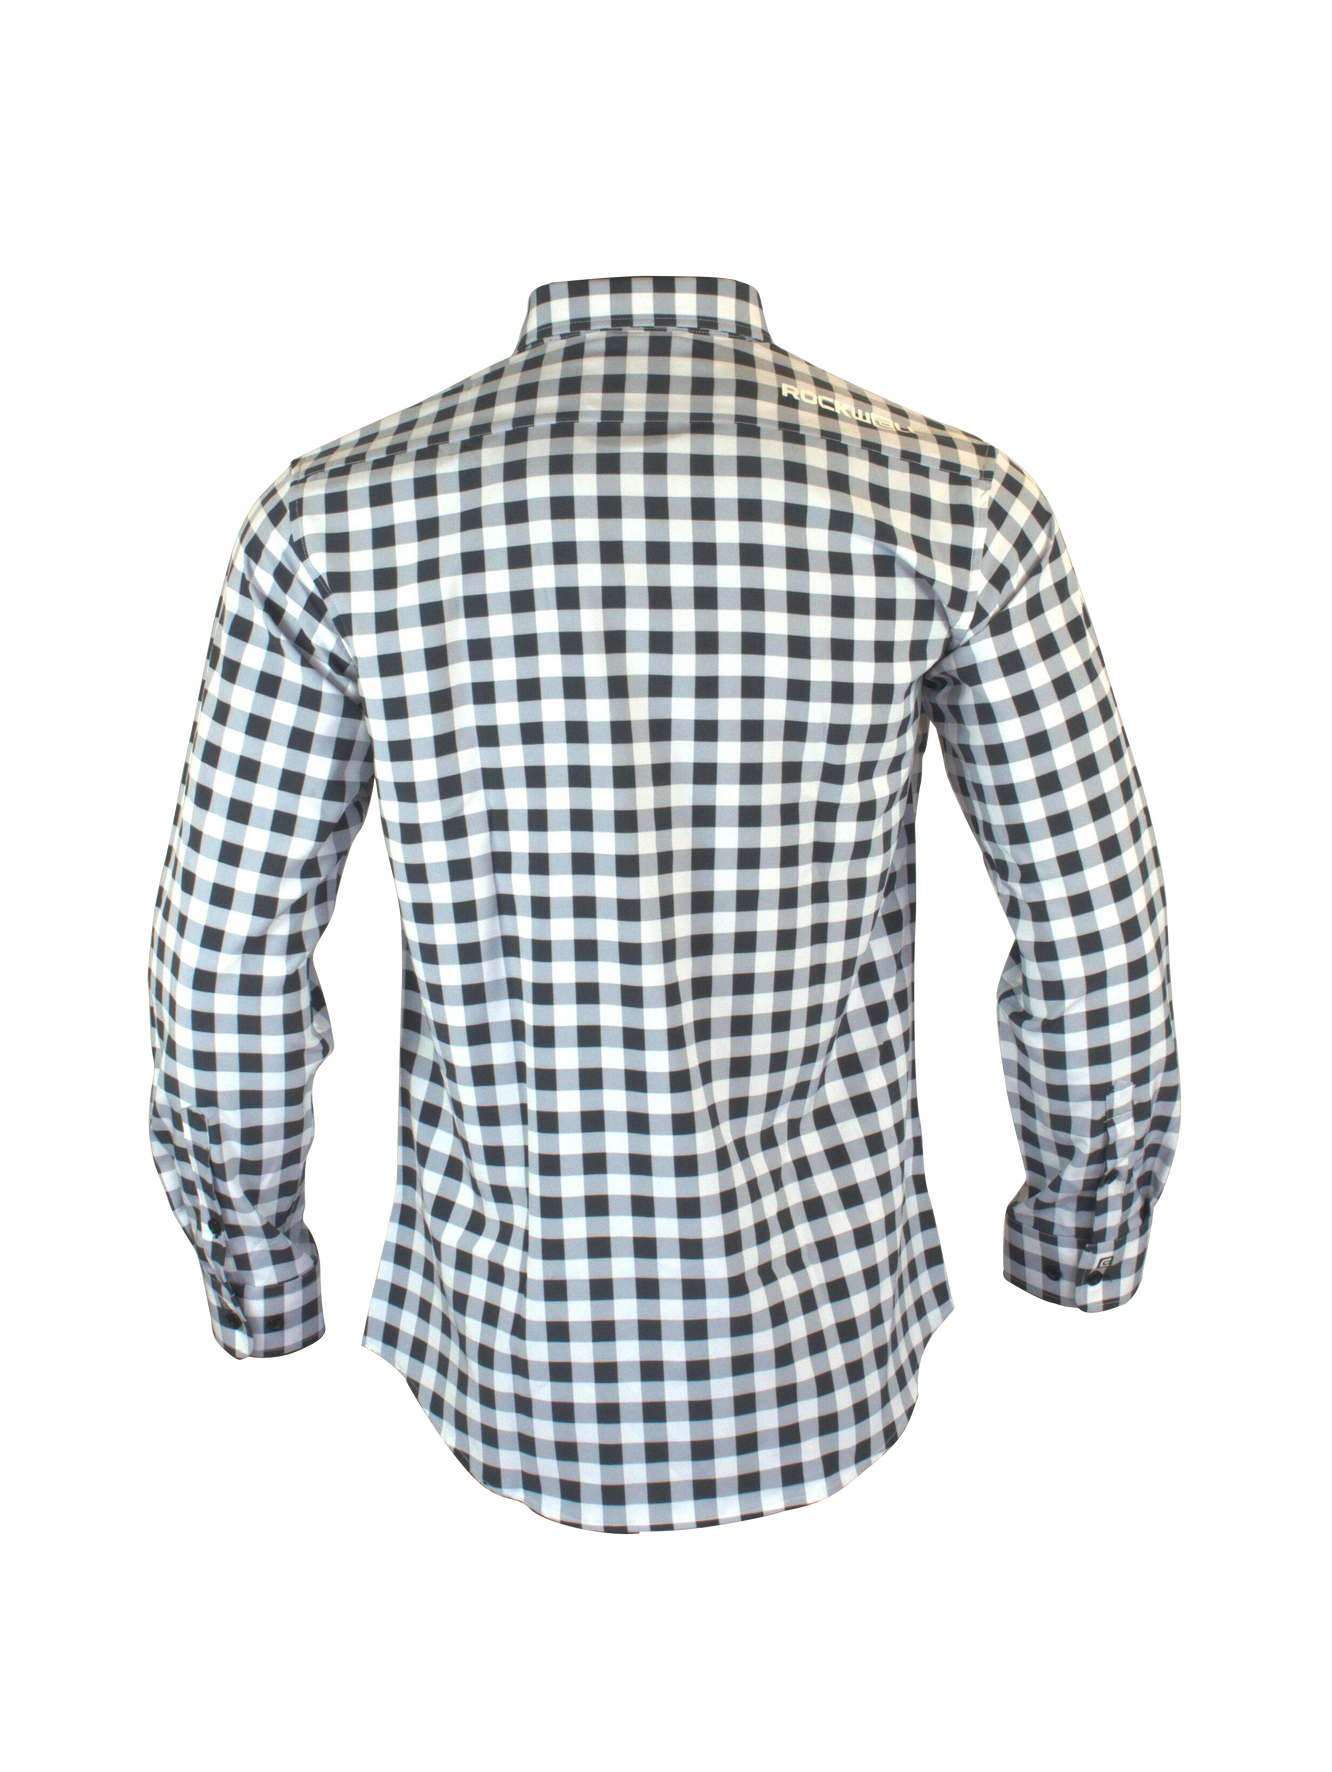 The Titan—Stylish Long Sleeve Shirts by Rockwell